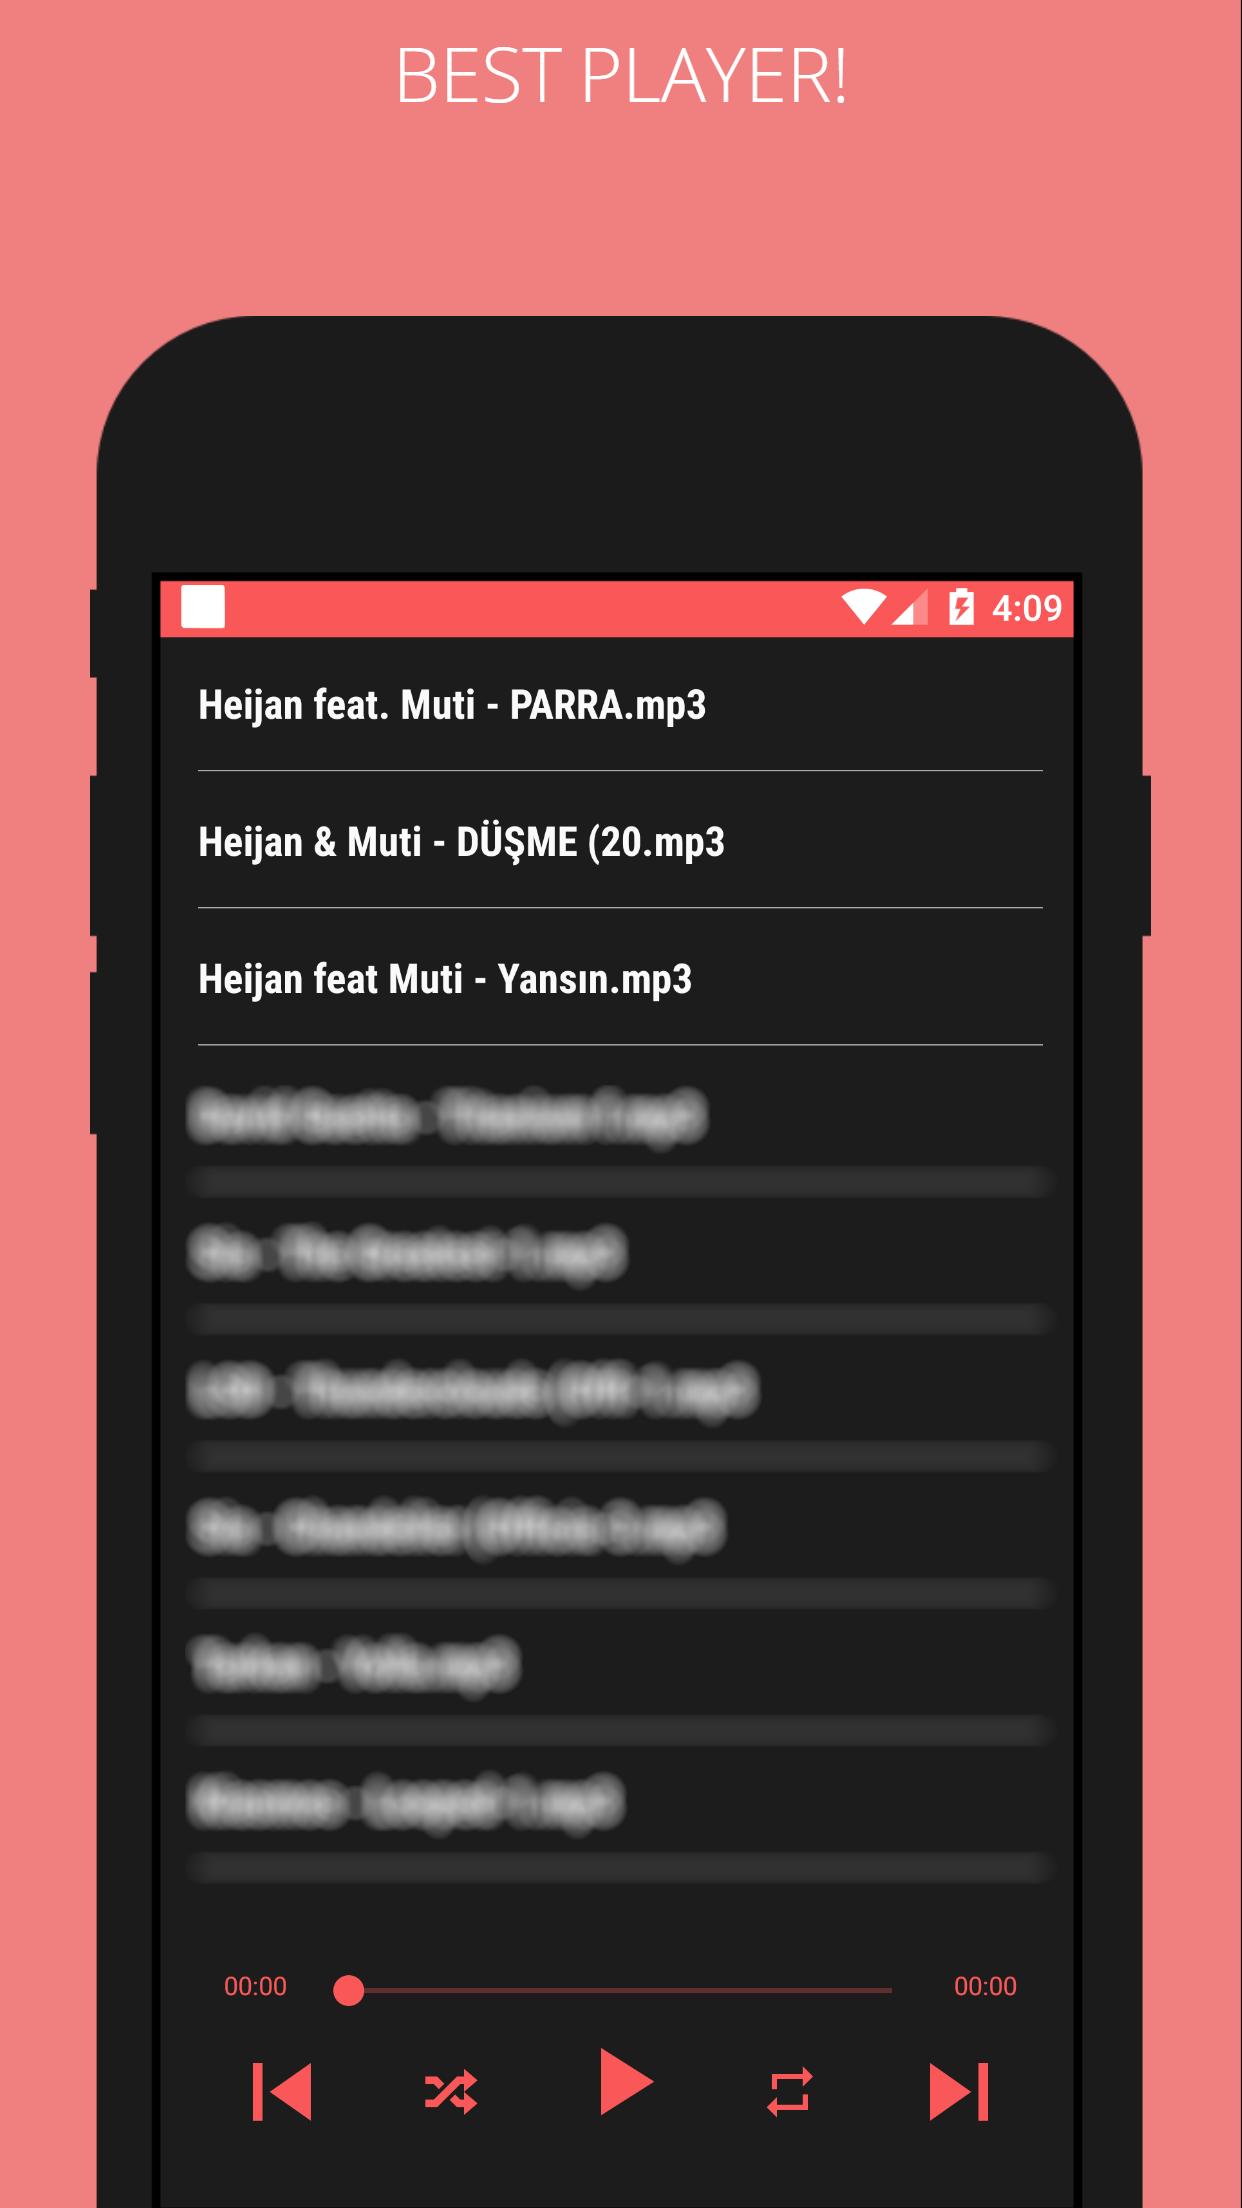 Darmowe mp3 do pobrania for Android - APK Download